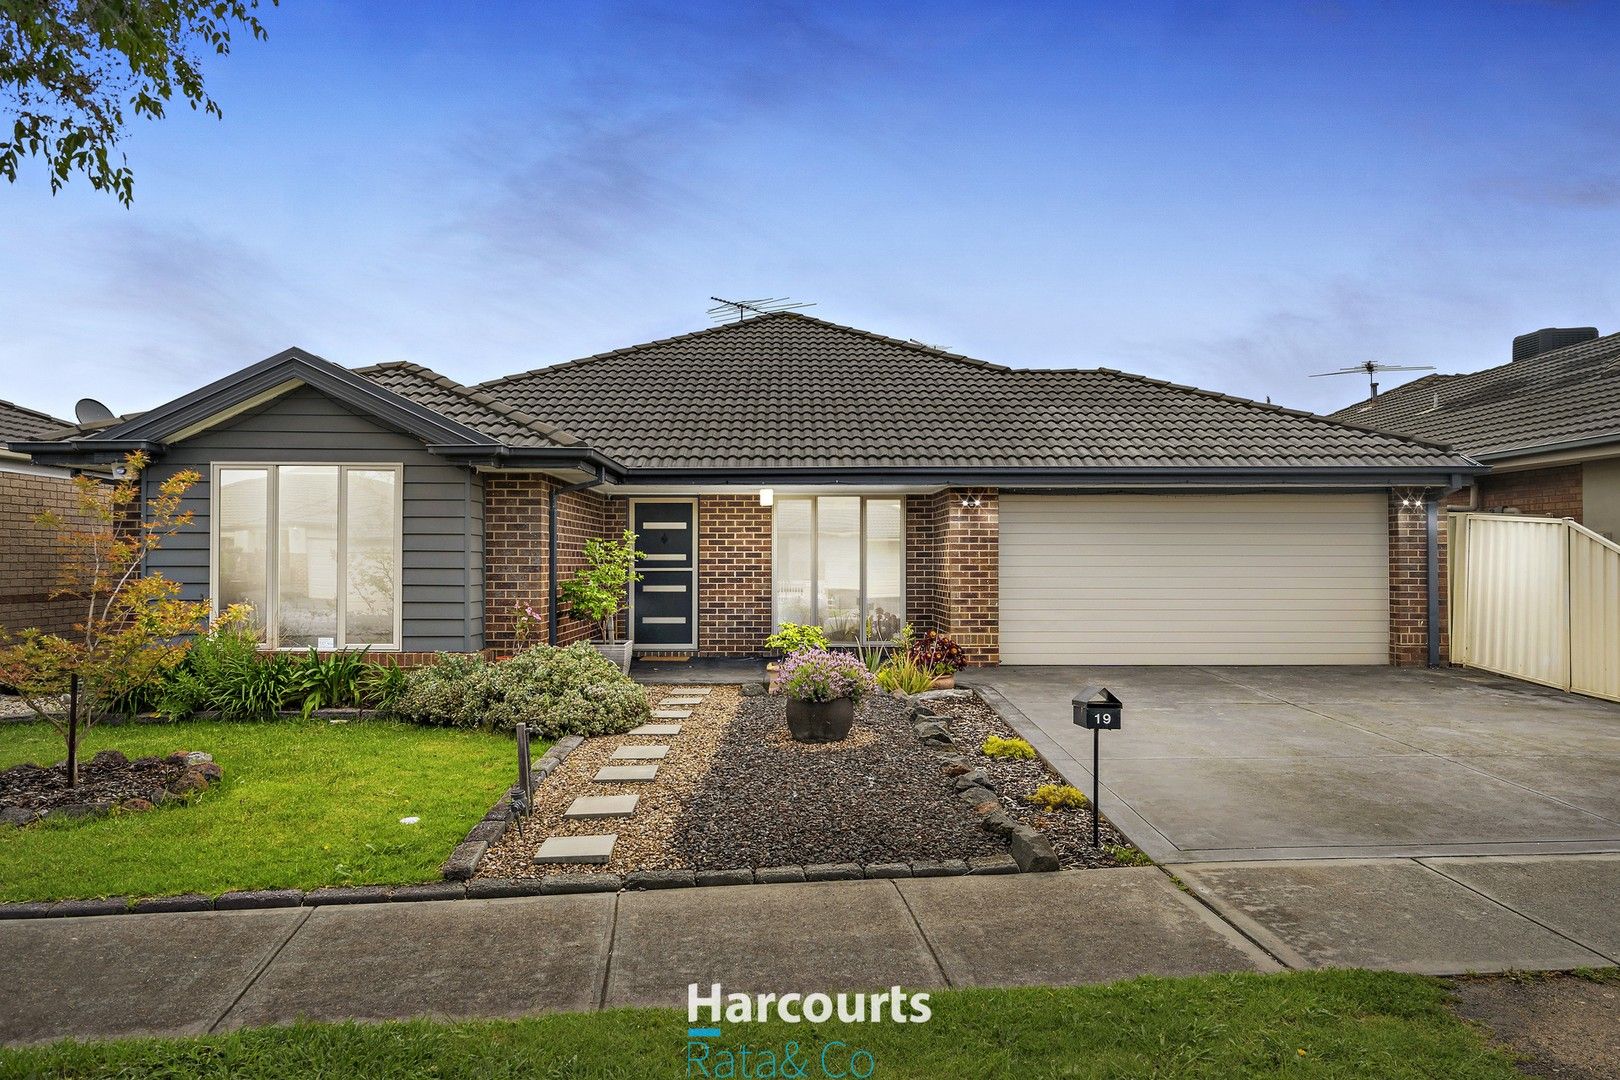 4 bedrooms House in 19 Gatestone Road EPPING VIC, 3076